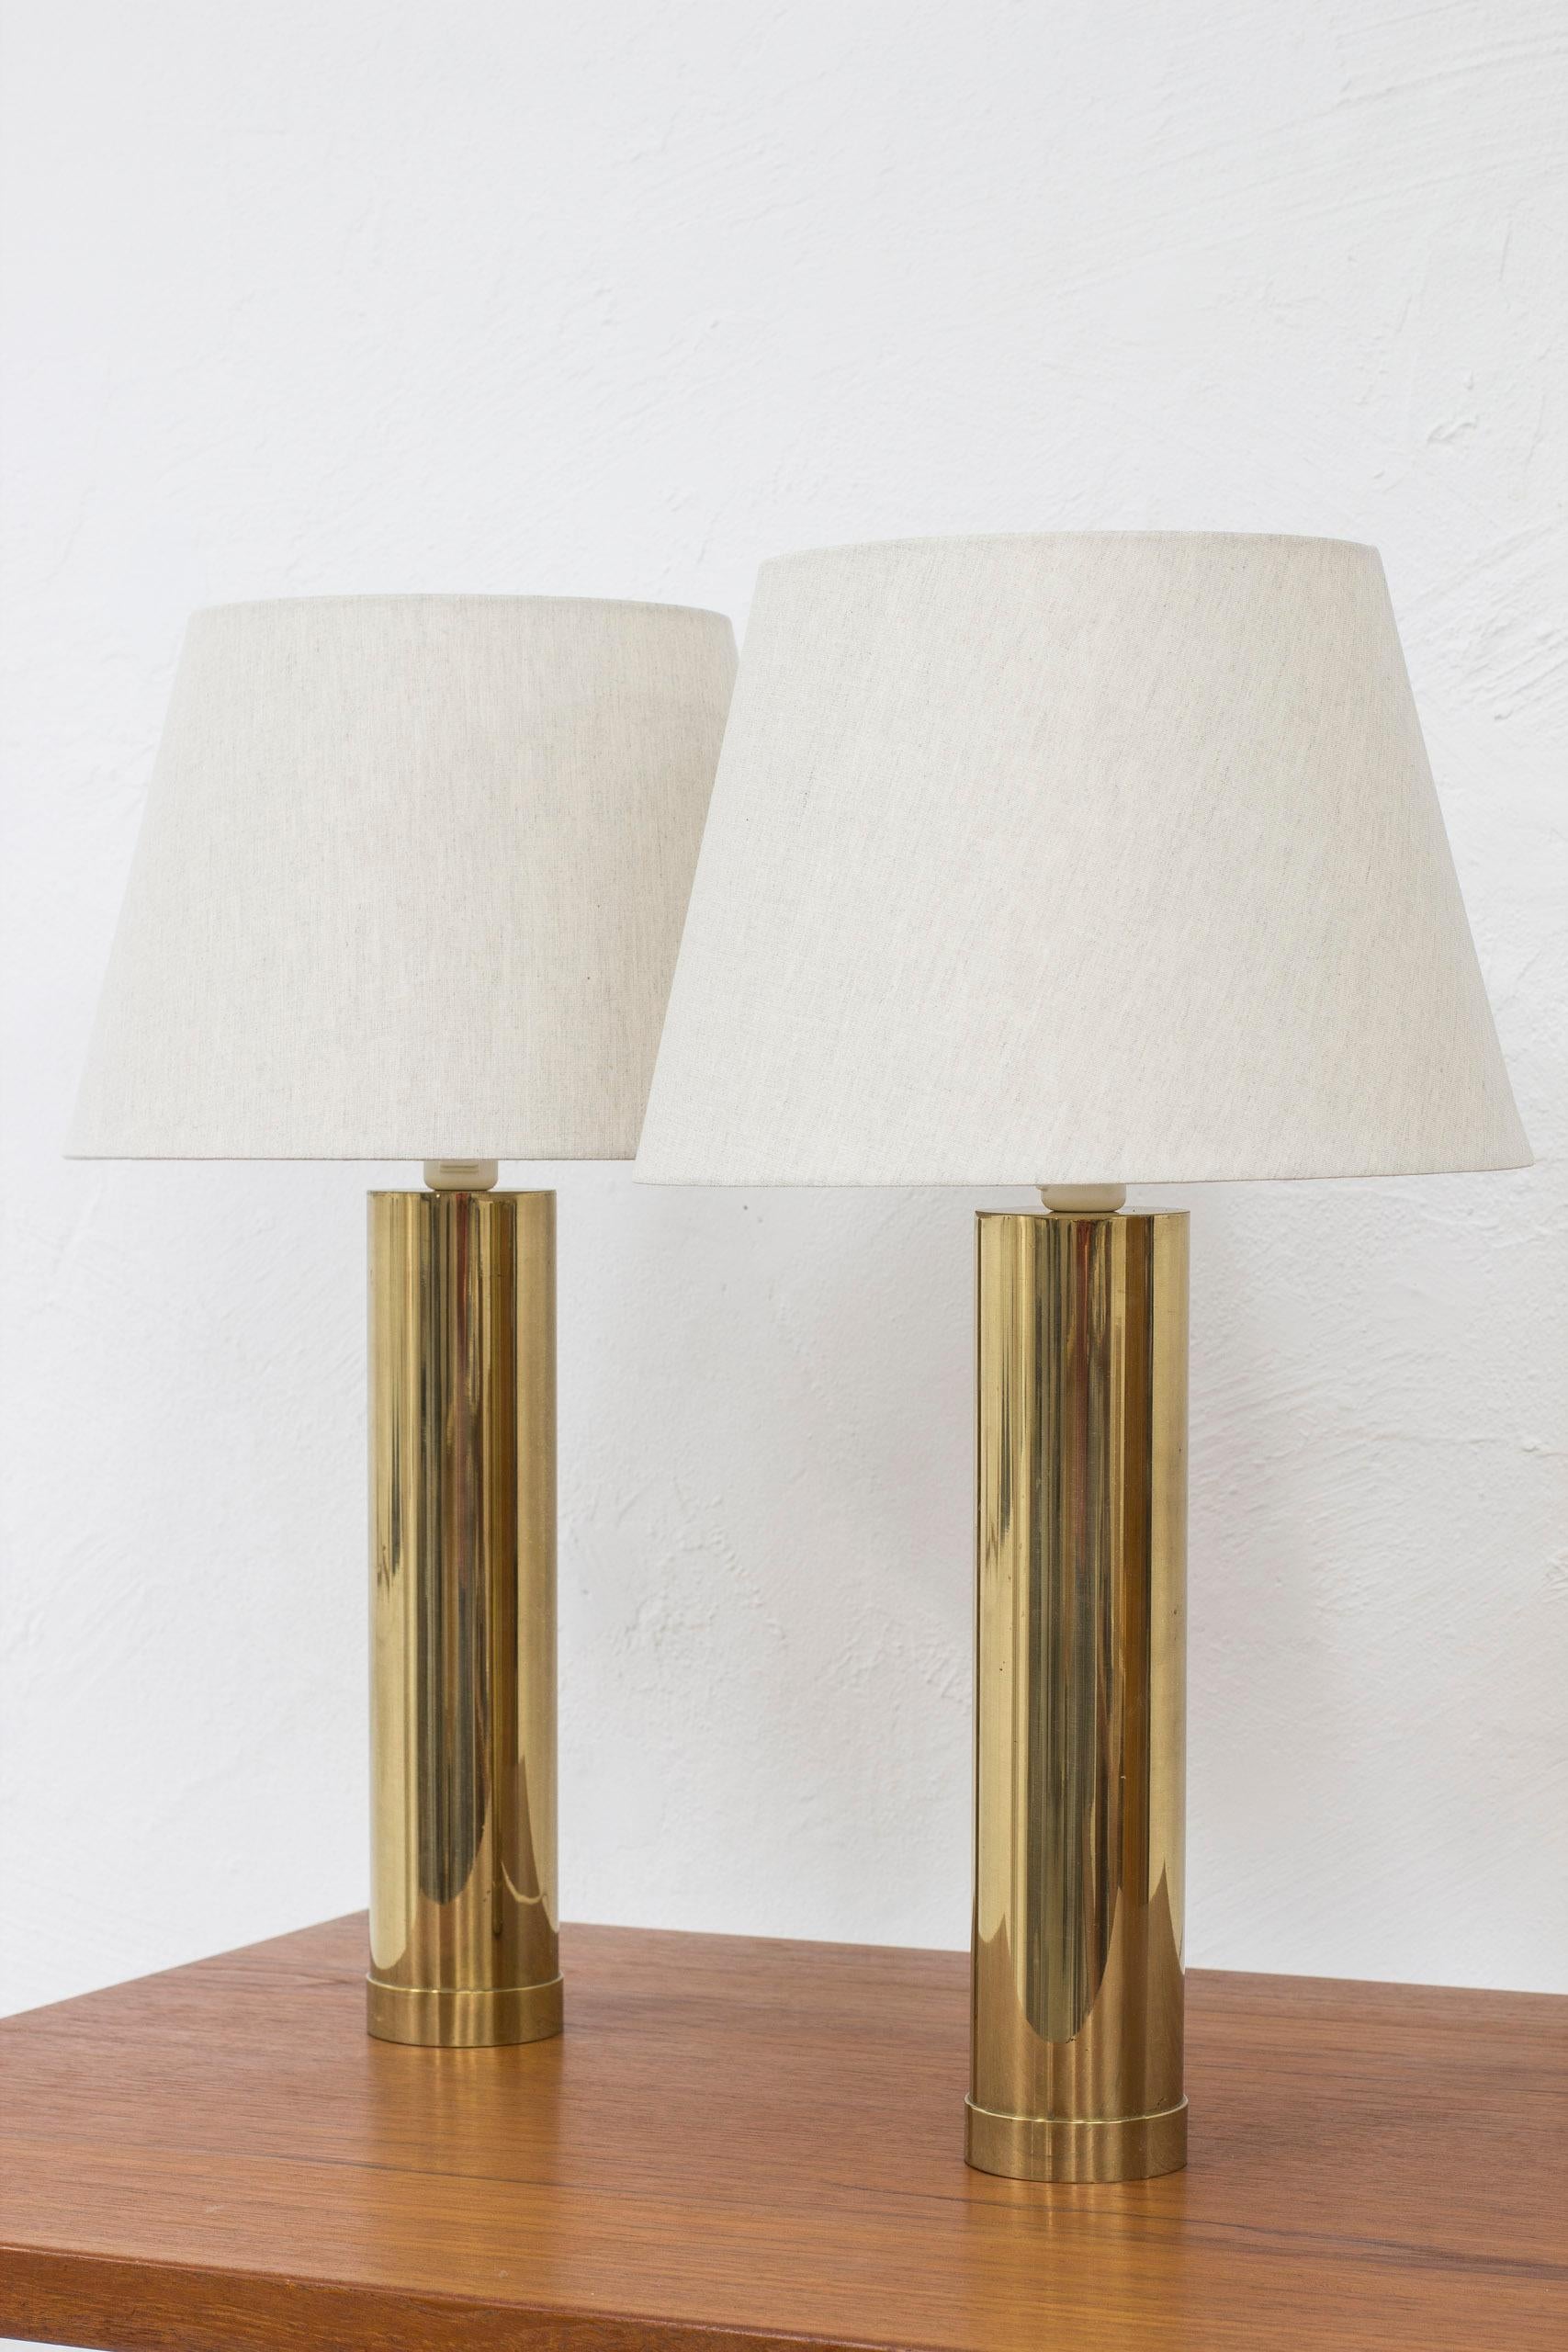 Scandinavian Modern Pair of Brass Table Lamps by Bergboms, Sweden, 1960s, 4 Pcs Total For Sale